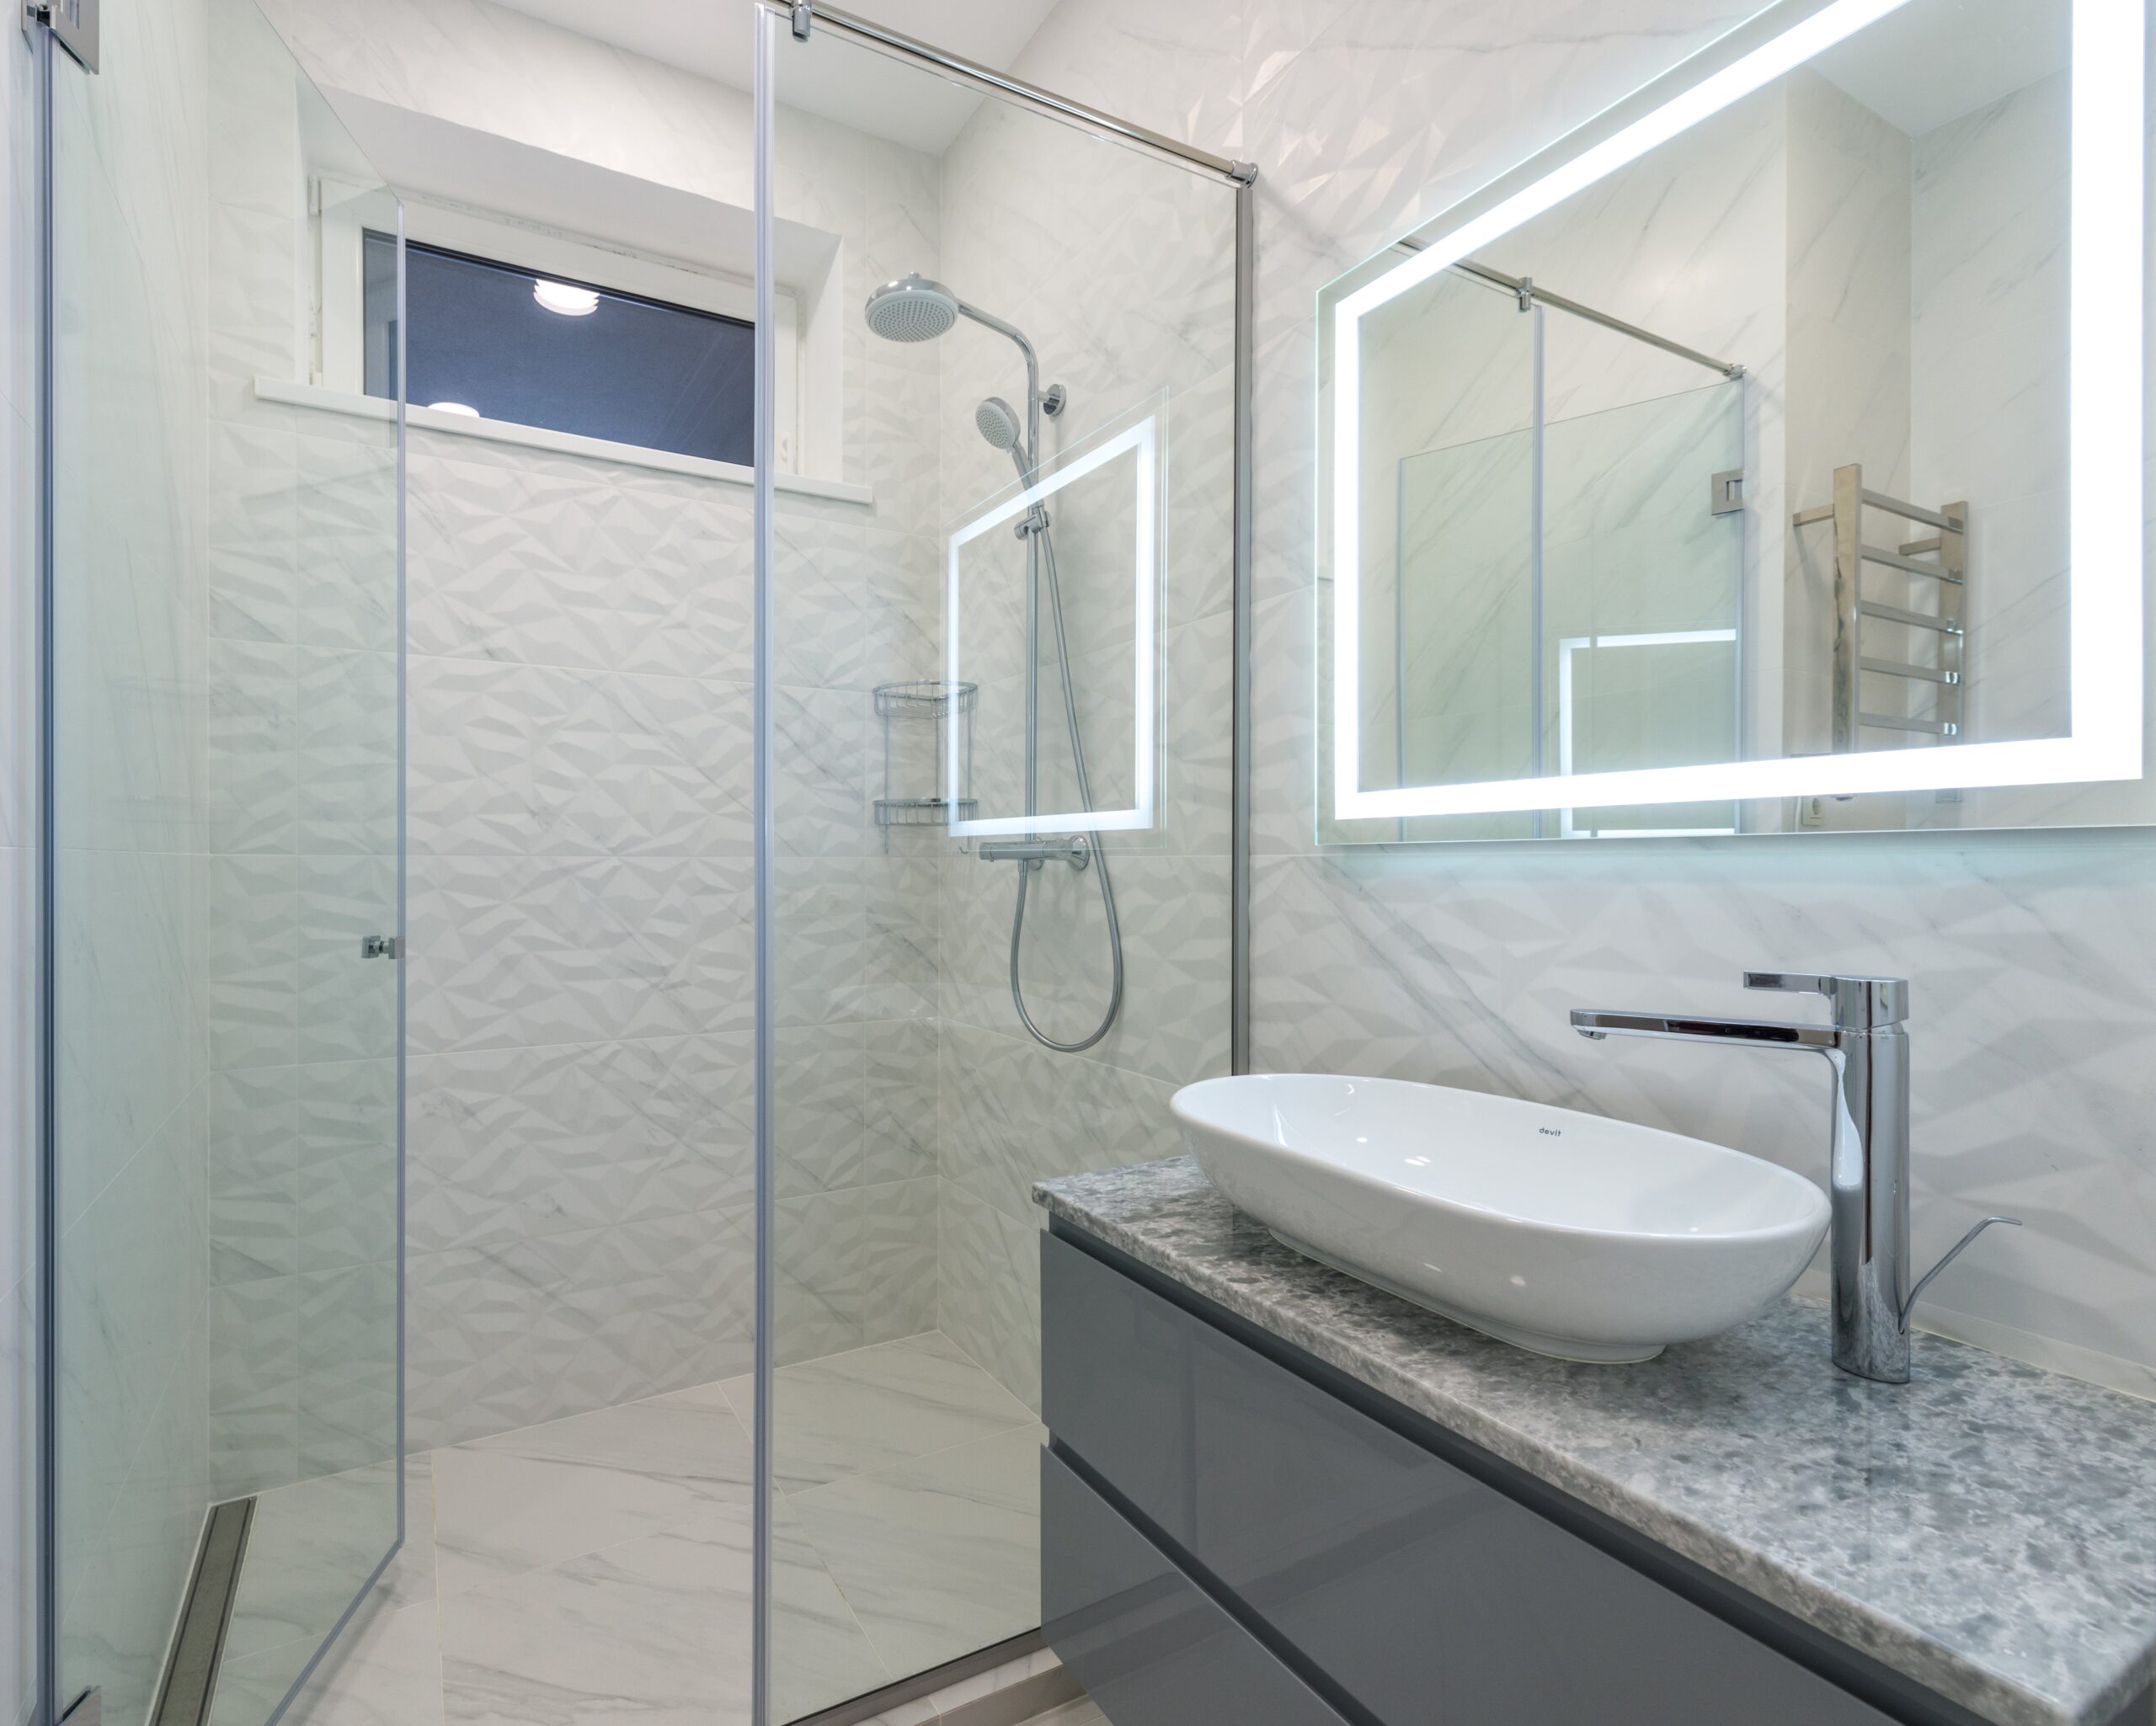 Commercial Washroom Renovation Choosing the Right Fixtures and Fittings